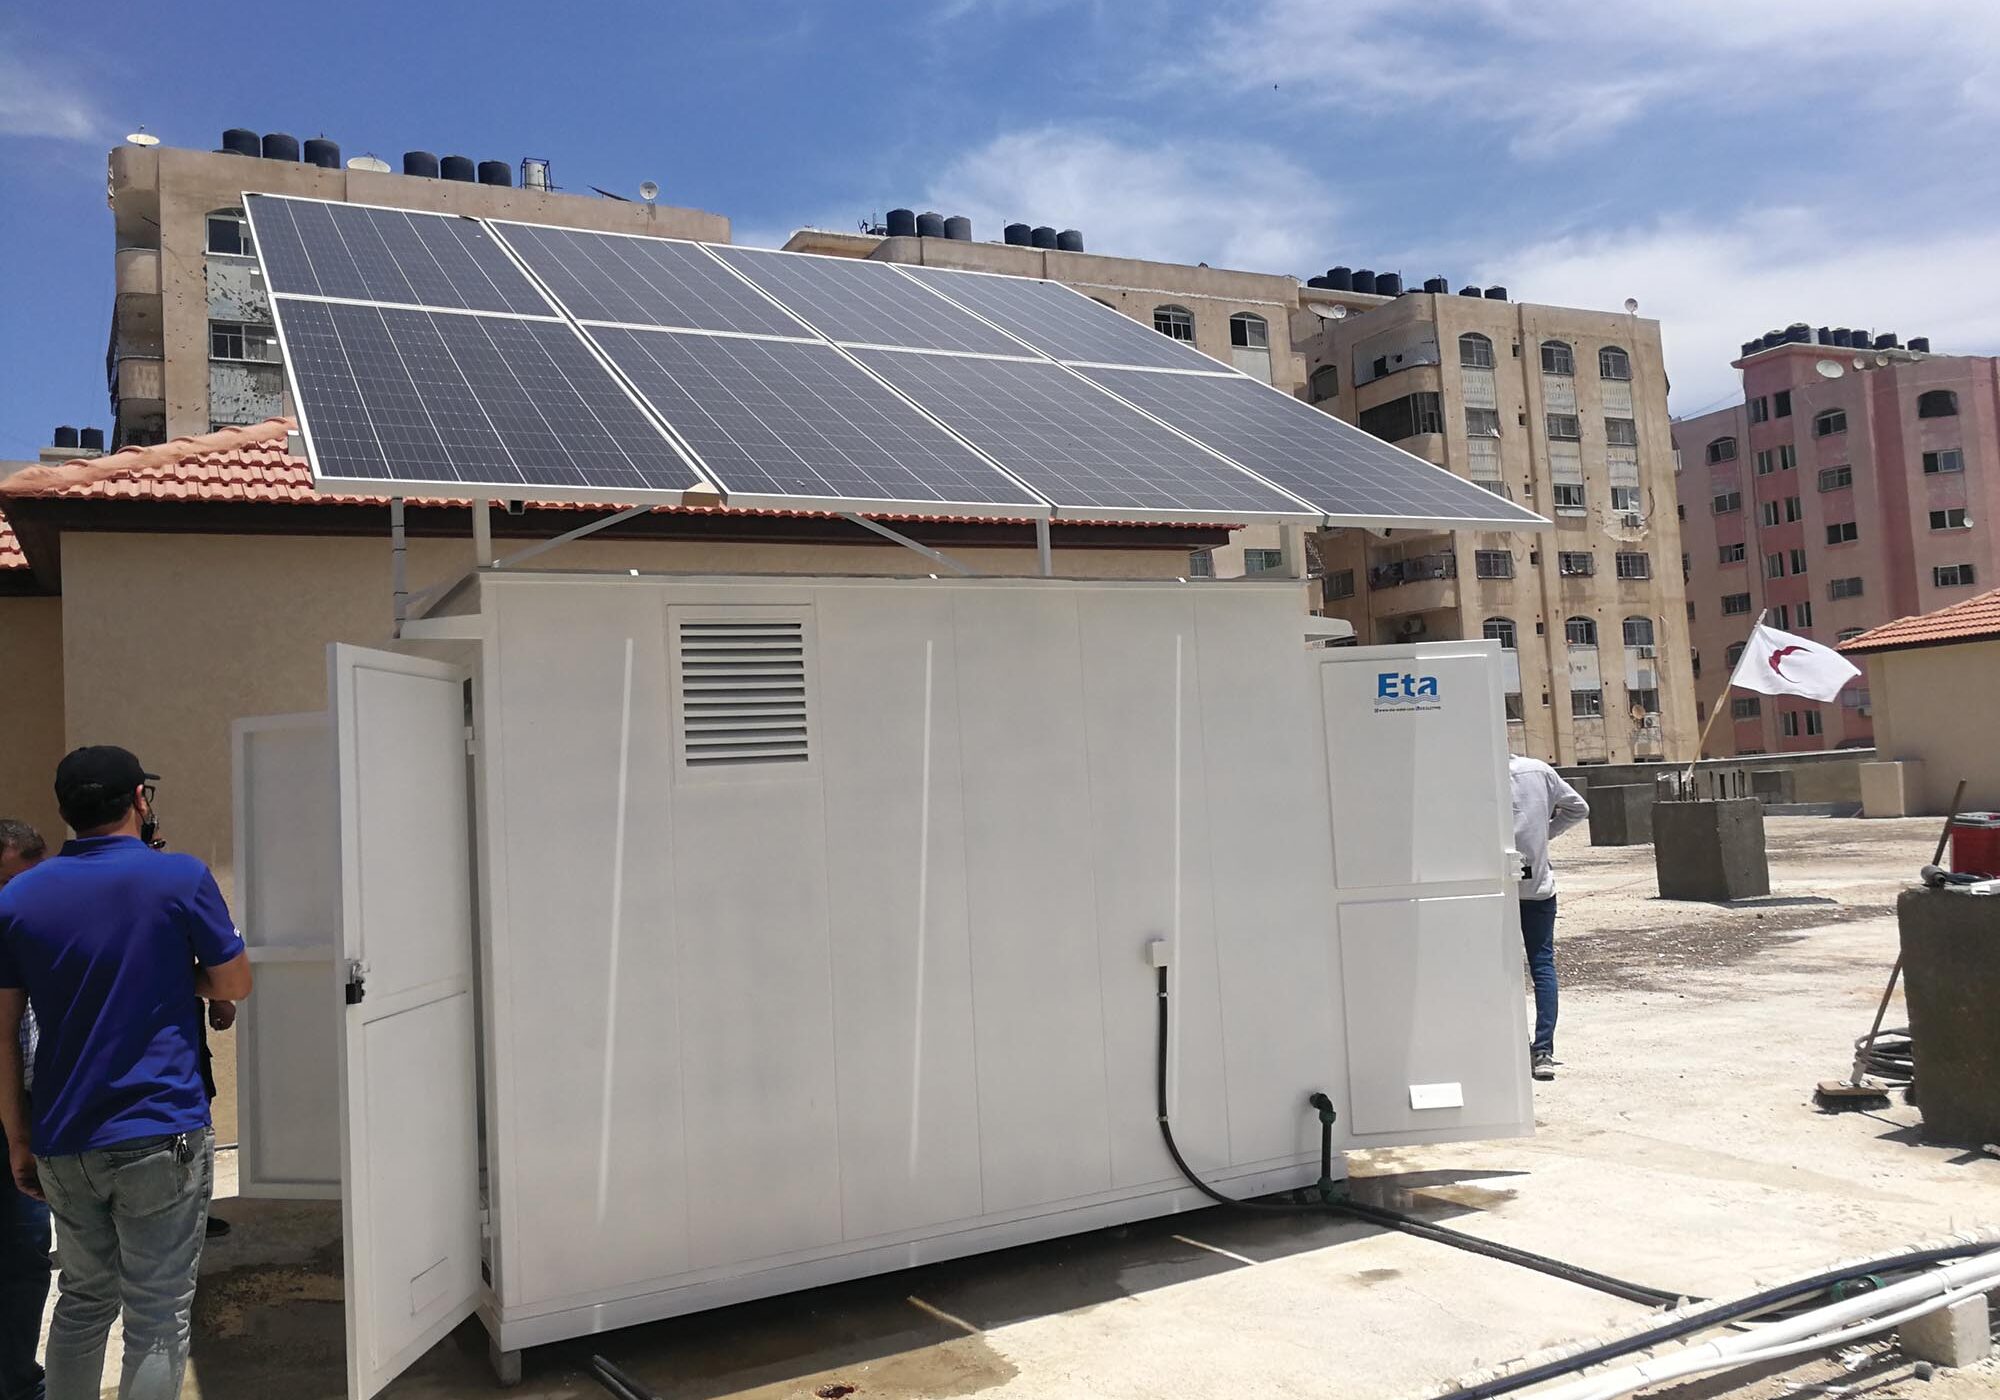 Anera installed a 1,320 gallon a day
reverse osmosis unit, and a solar system
to power it, at the Near East Council of
Churches Vocational Training Center in
Shejaiya. This center serves more than
5,000 visitors and trainees per month.